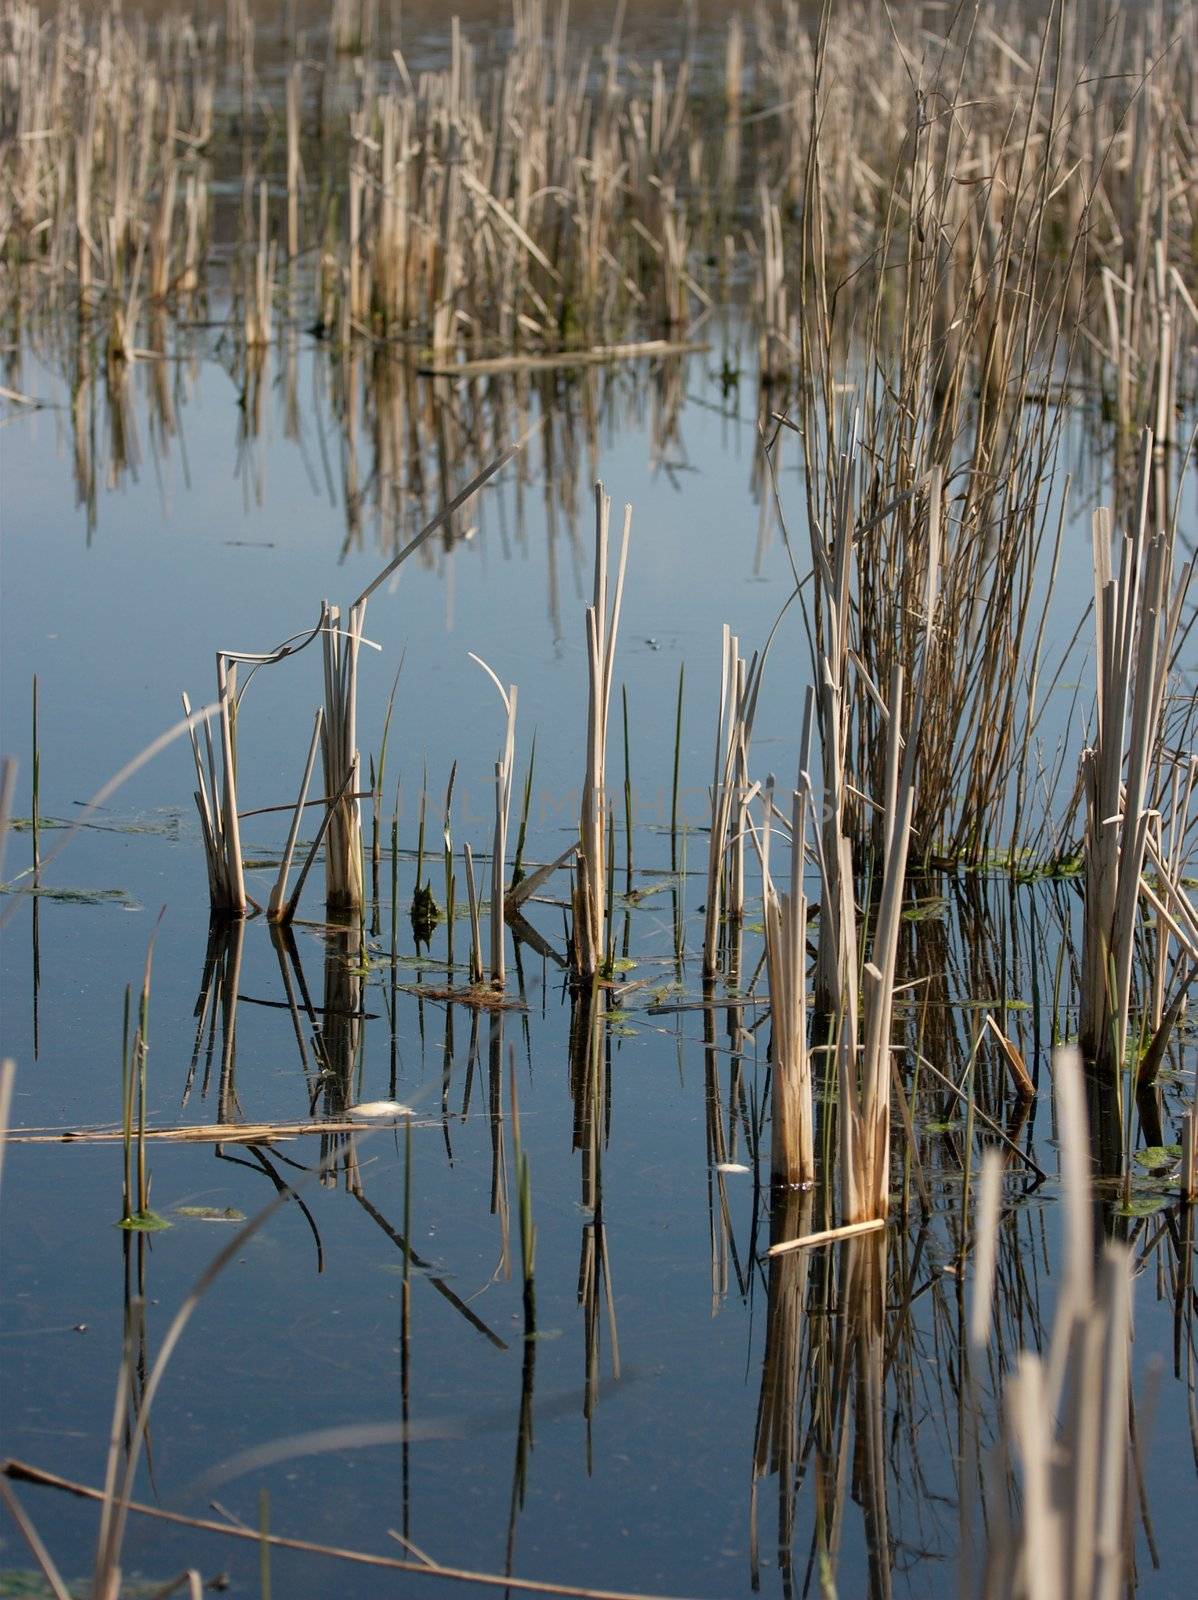 Detail of a swamp with some reed